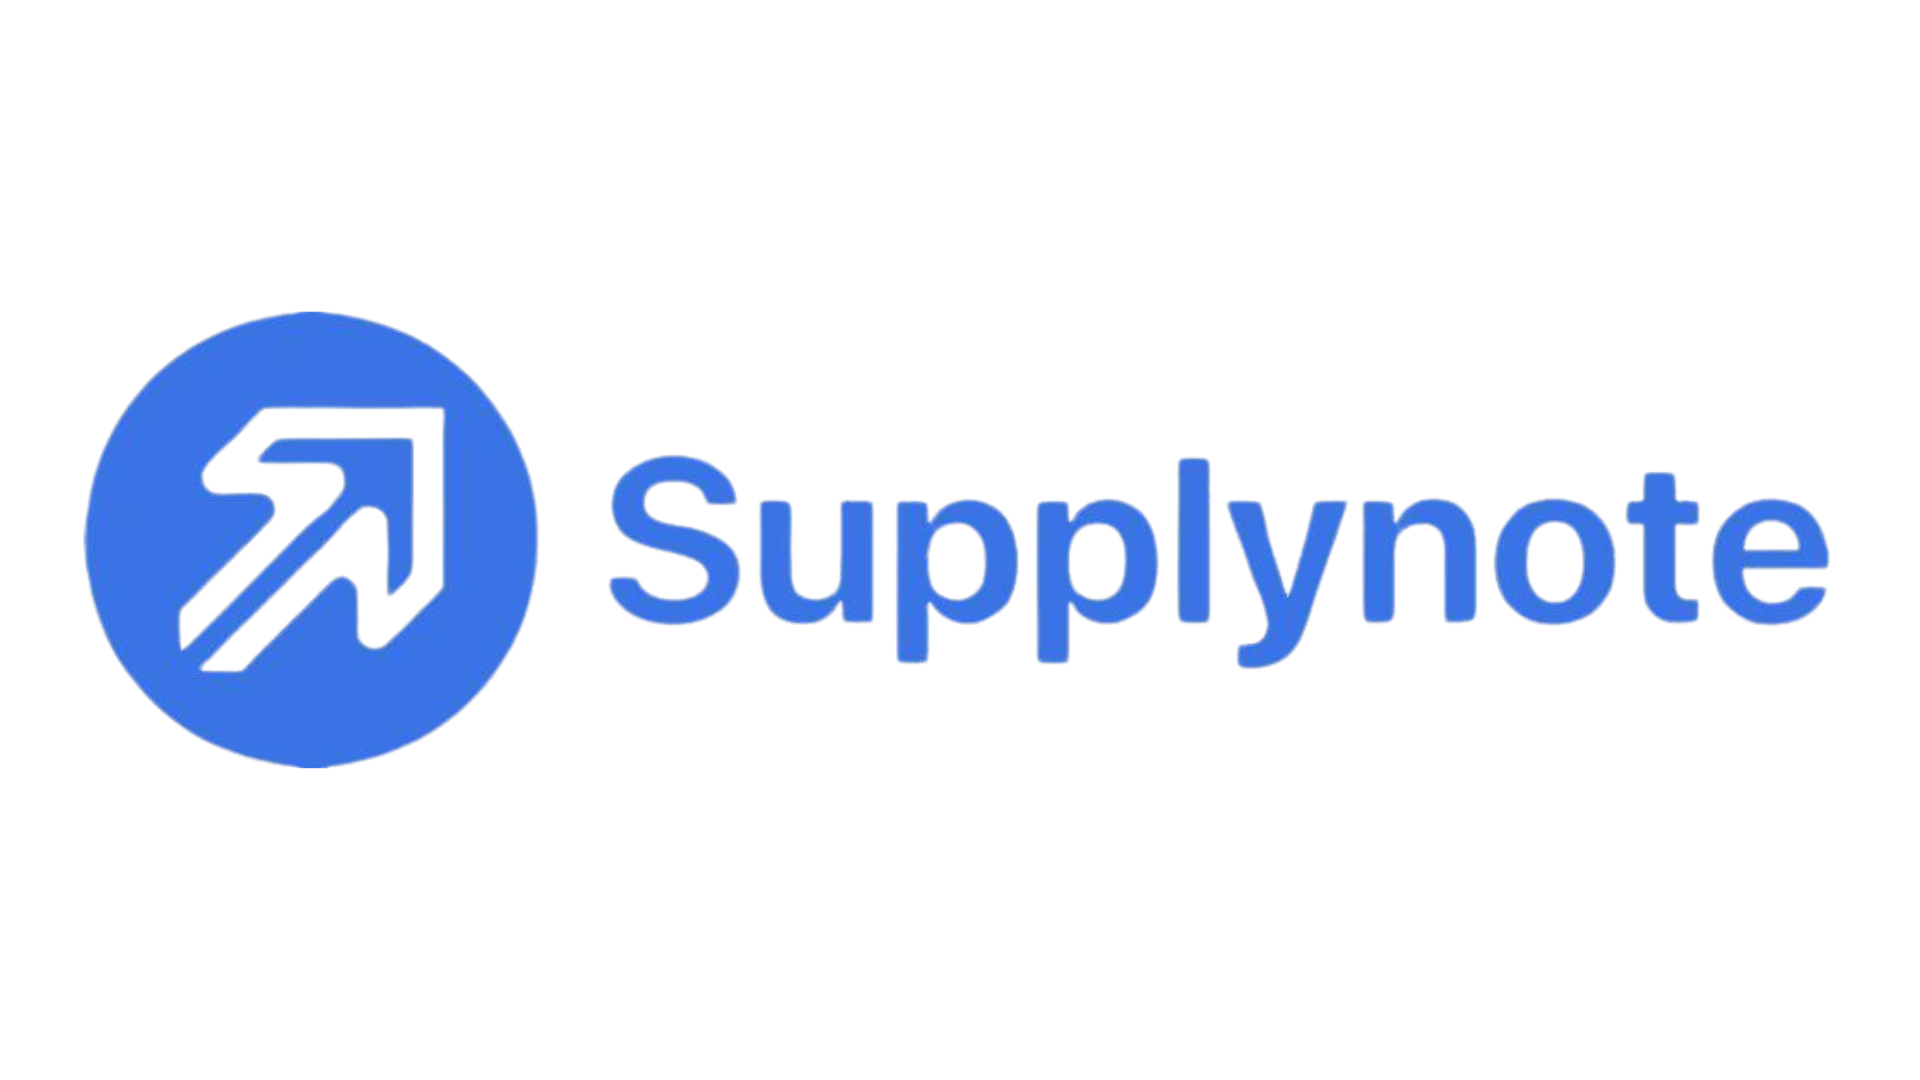 Supplynote